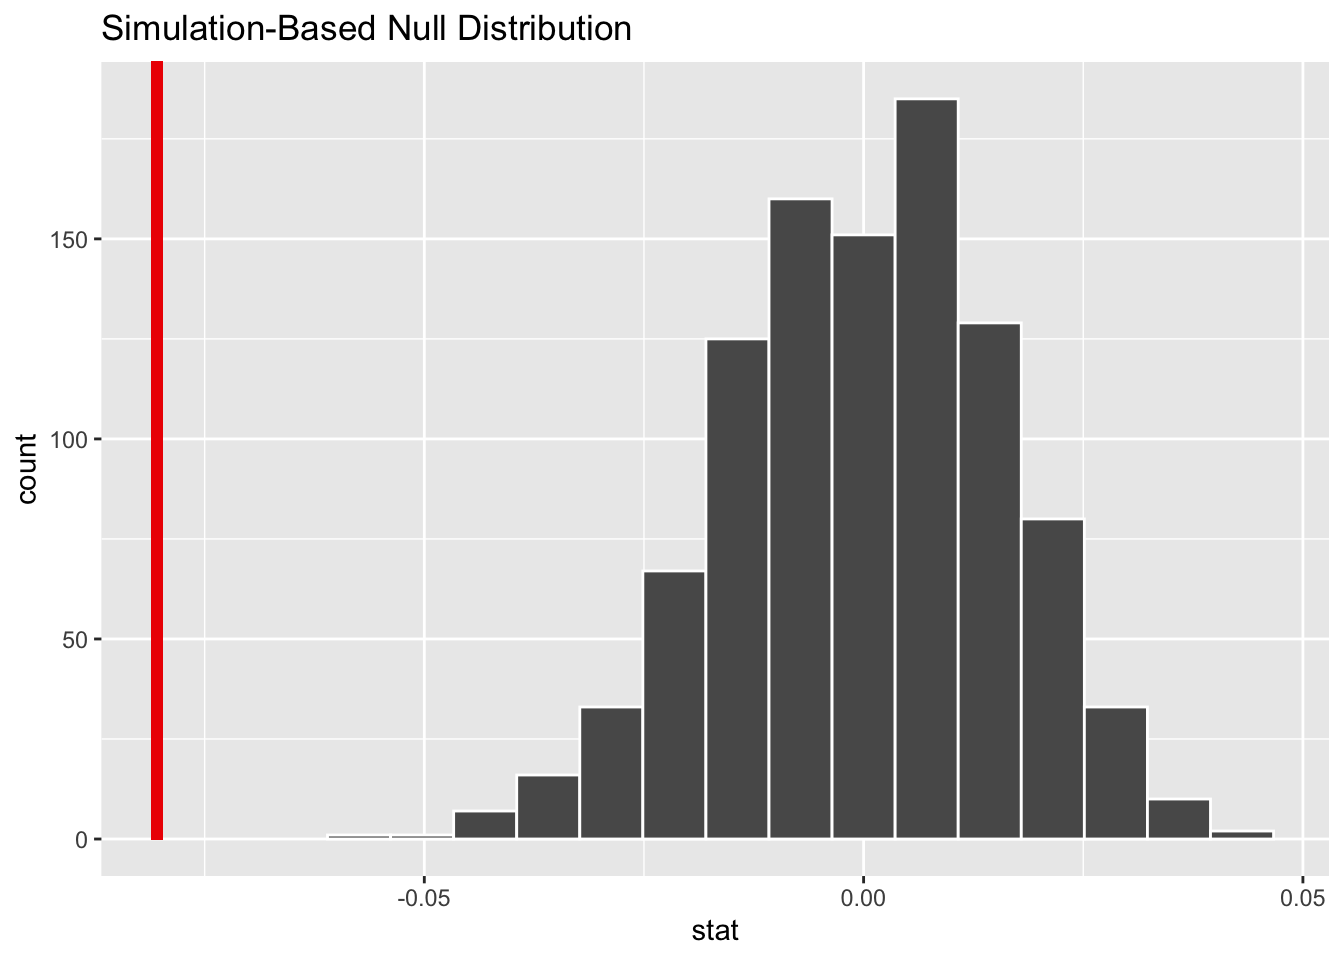 Bootstrap distribution for zinc concentration differences; vertical red line = observed mean difference of 10 pairs of sample